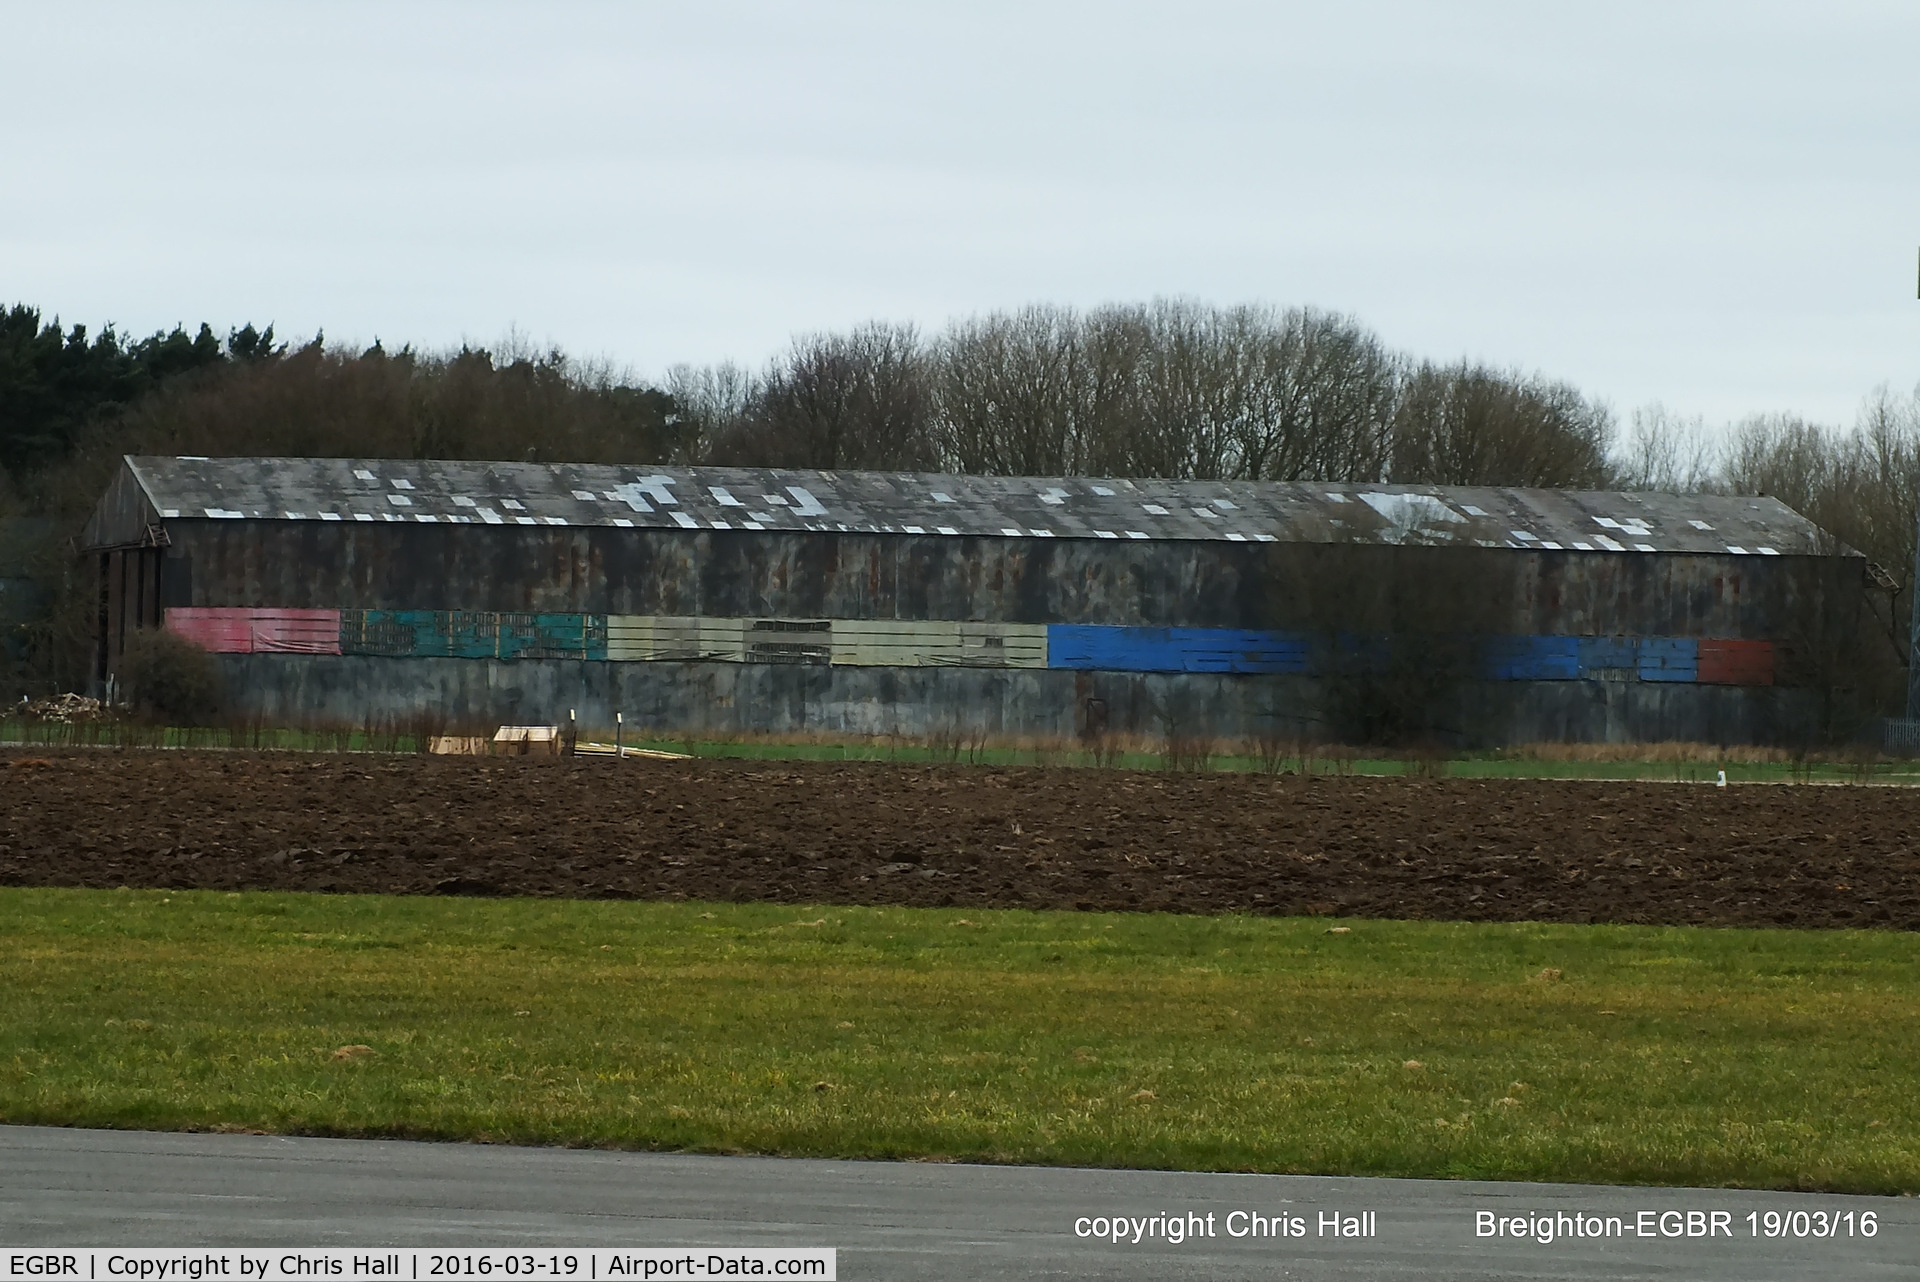 EGBR Airport - the only surviving WWII hangar at Breighton